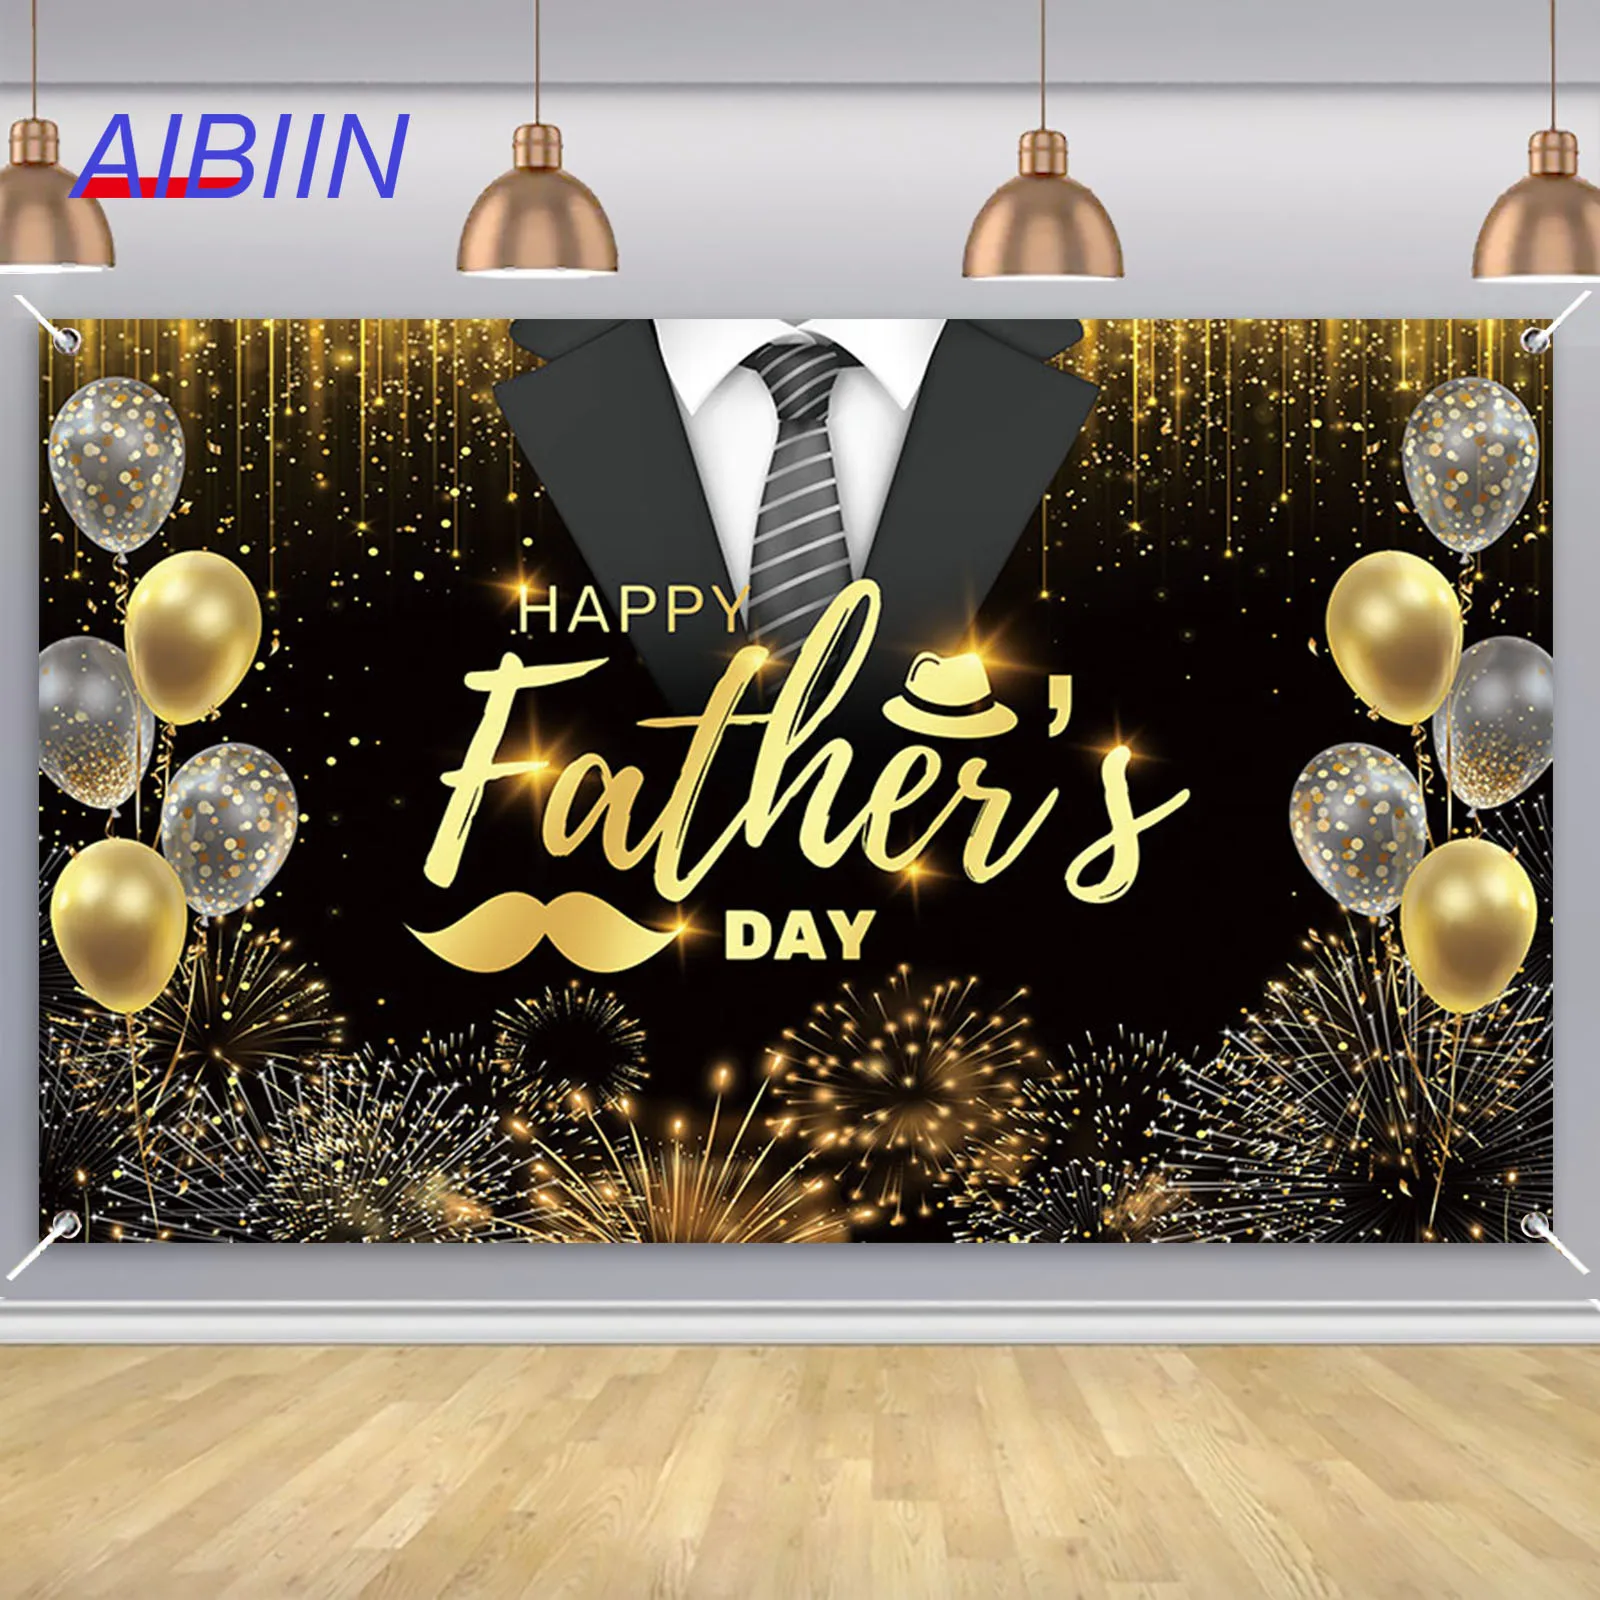 

AIBIIN Happy Father's Day Banner Backdrops Black Gold Gentleman Tuxedo Balloon Firework Party Decoration Flag Background